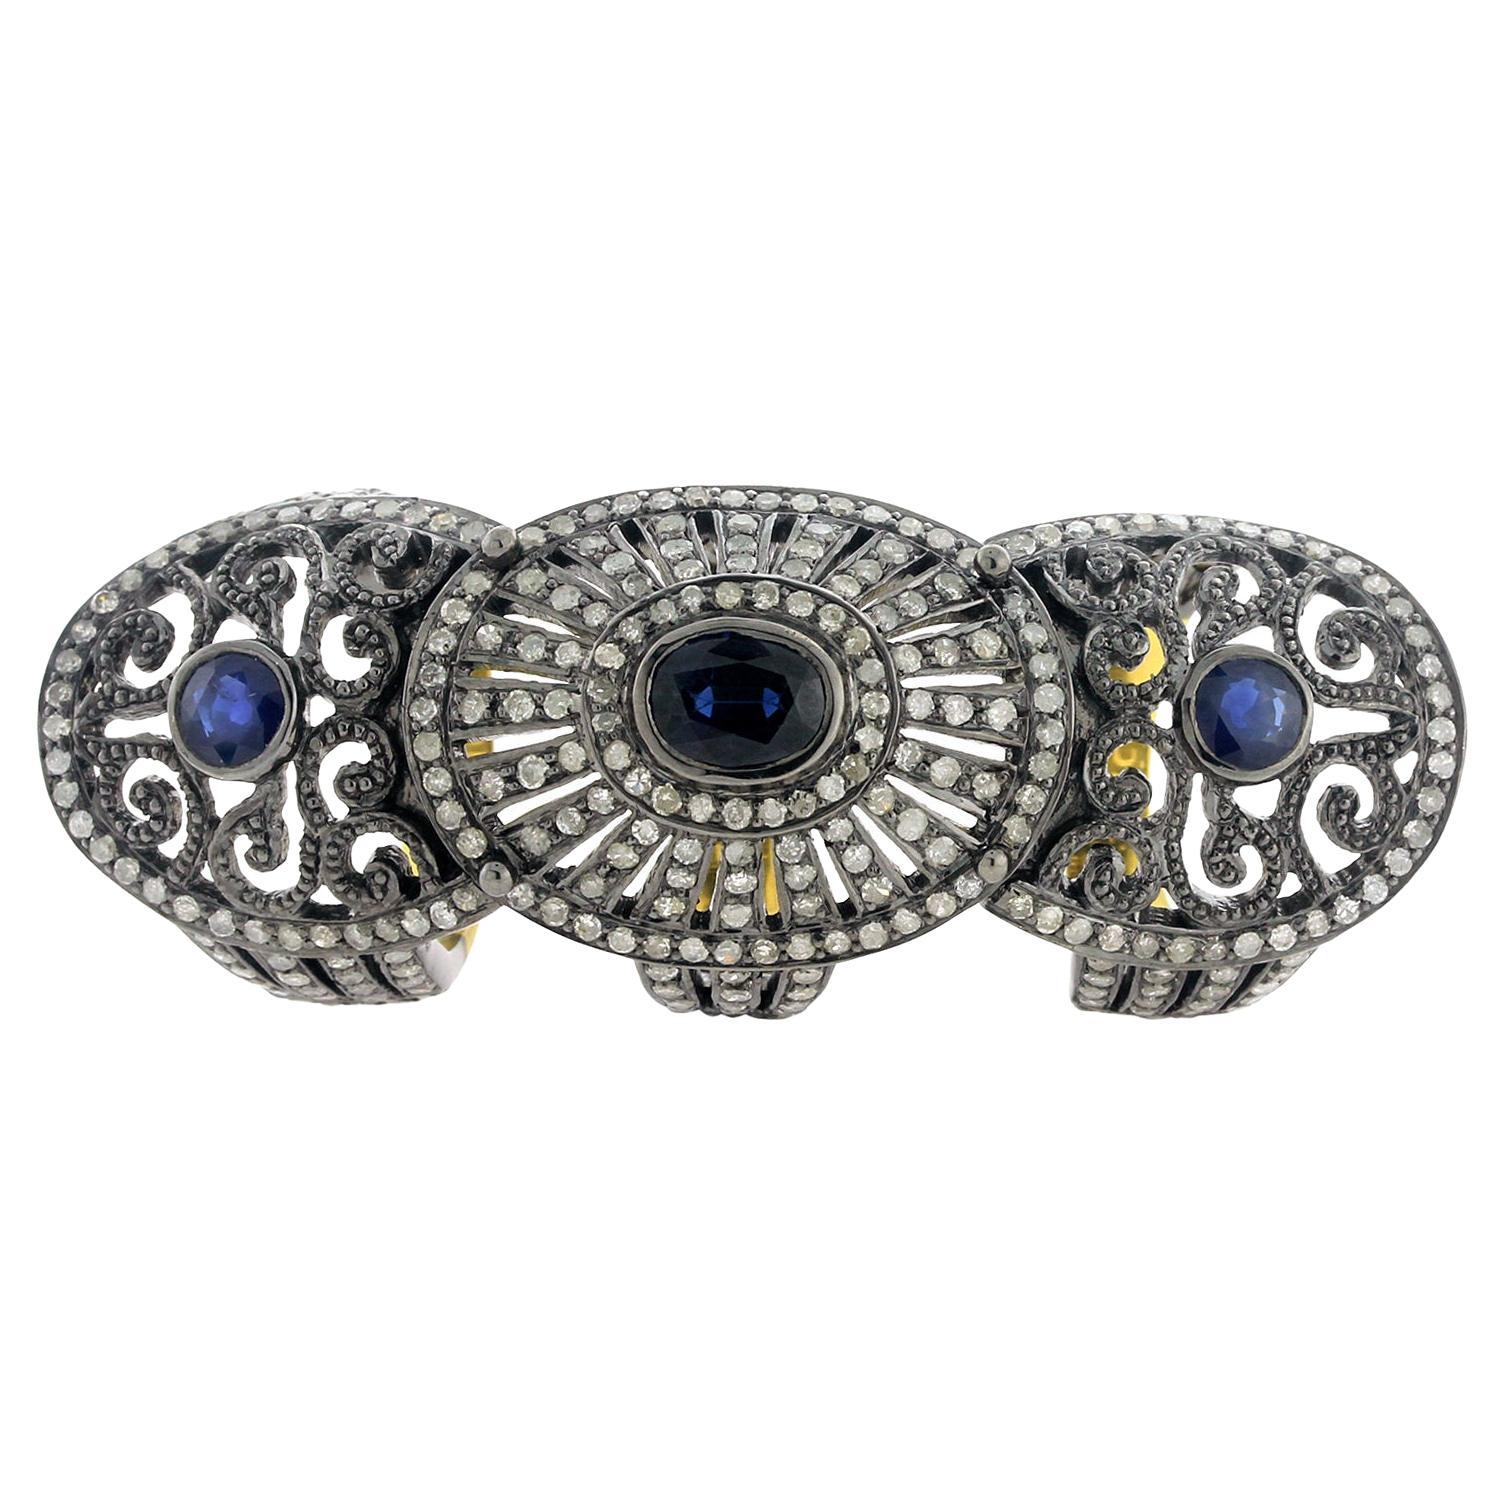 3 Stone Blue Sapphire Knuckle Ring with Pave Diamonds Made in 18k Gold & Silver